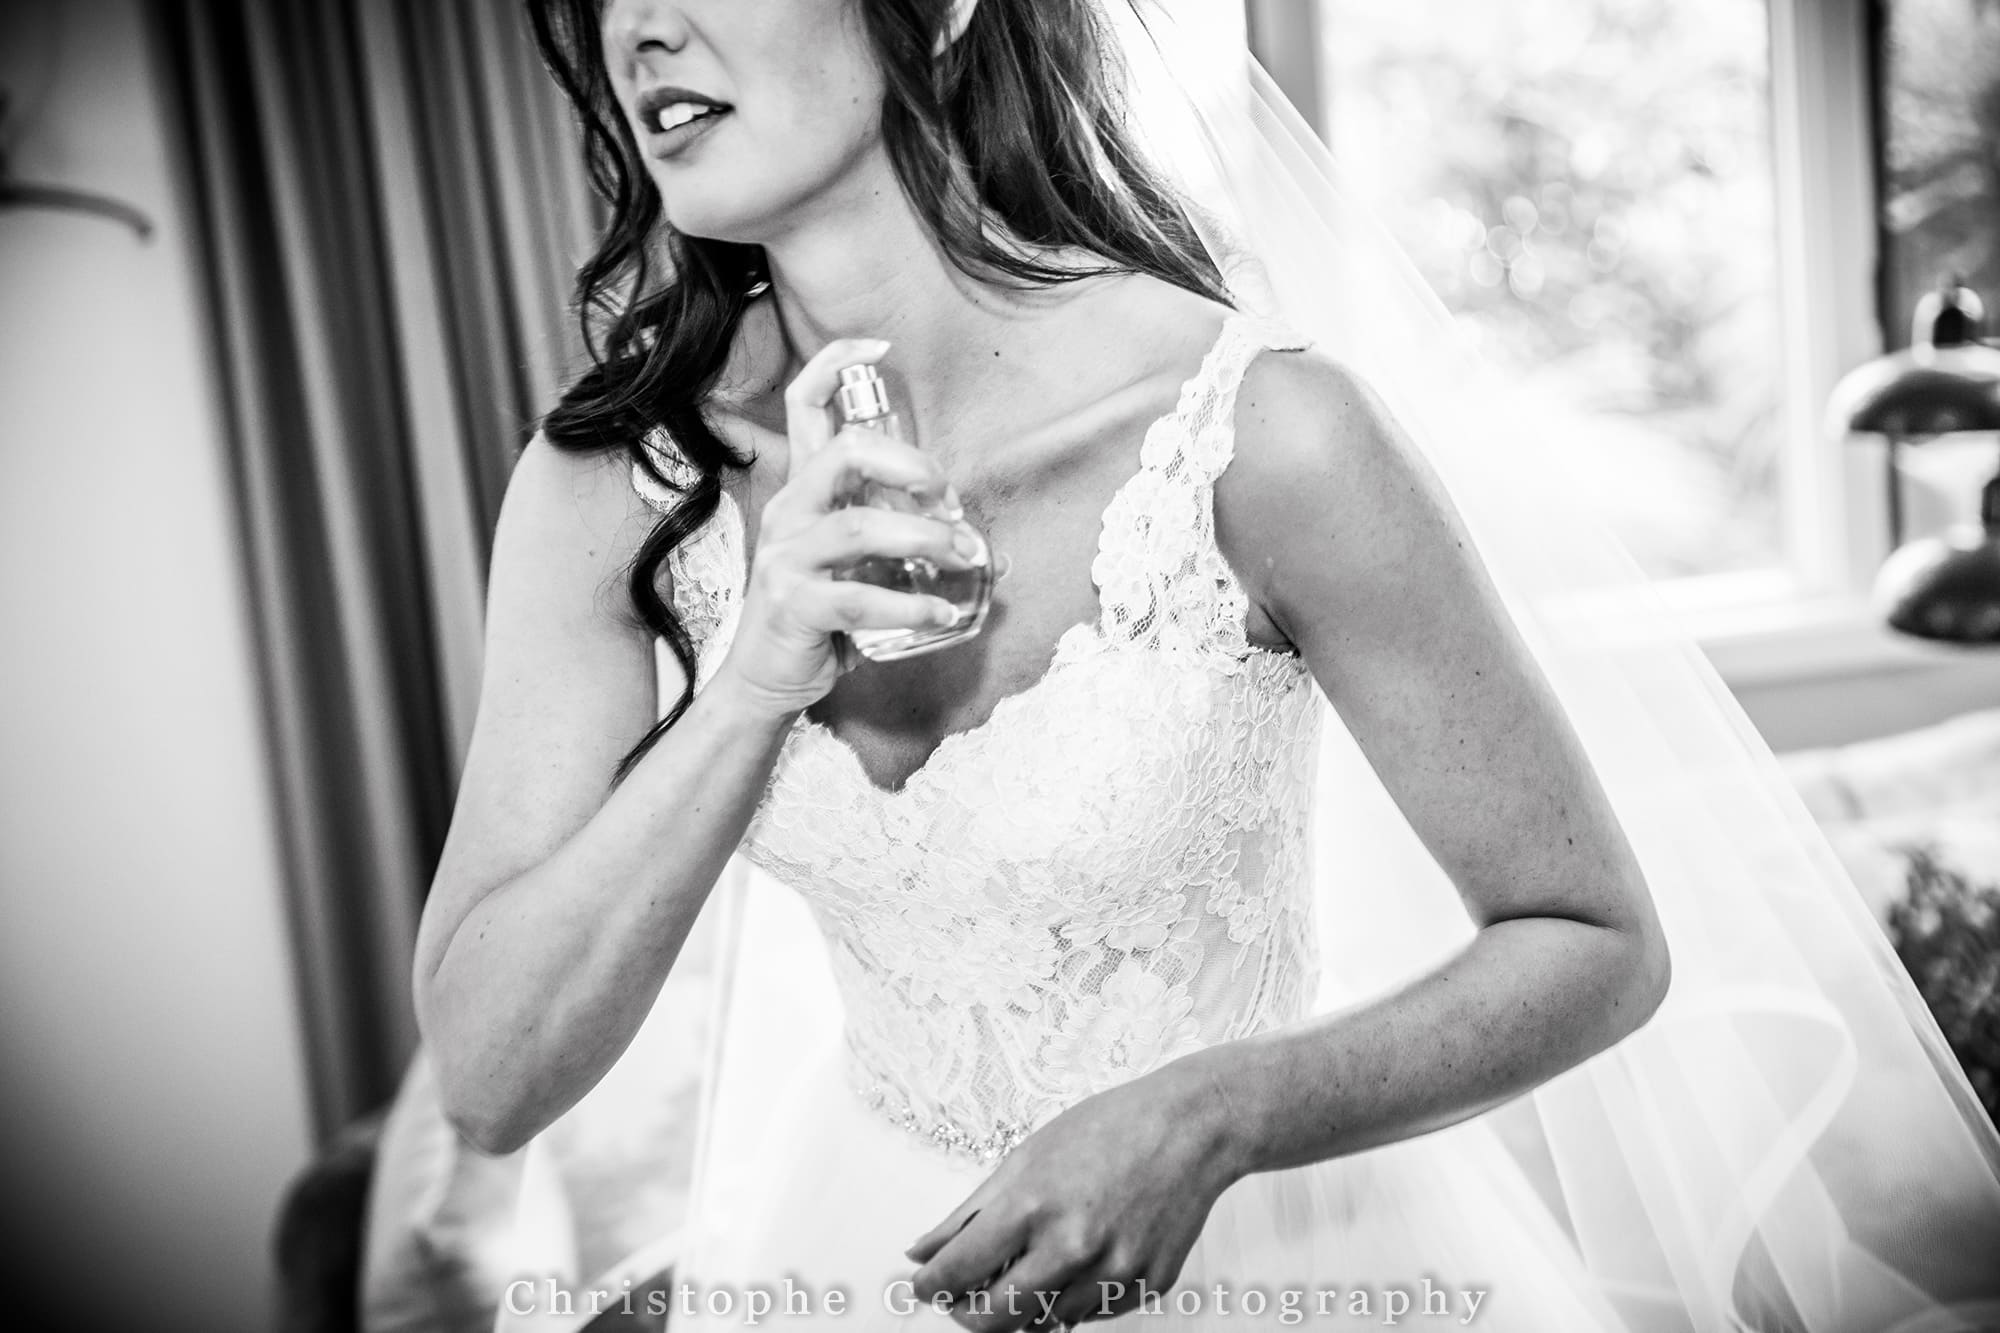 Wedding photography at the Vintners Golf Club in Yountville, CA